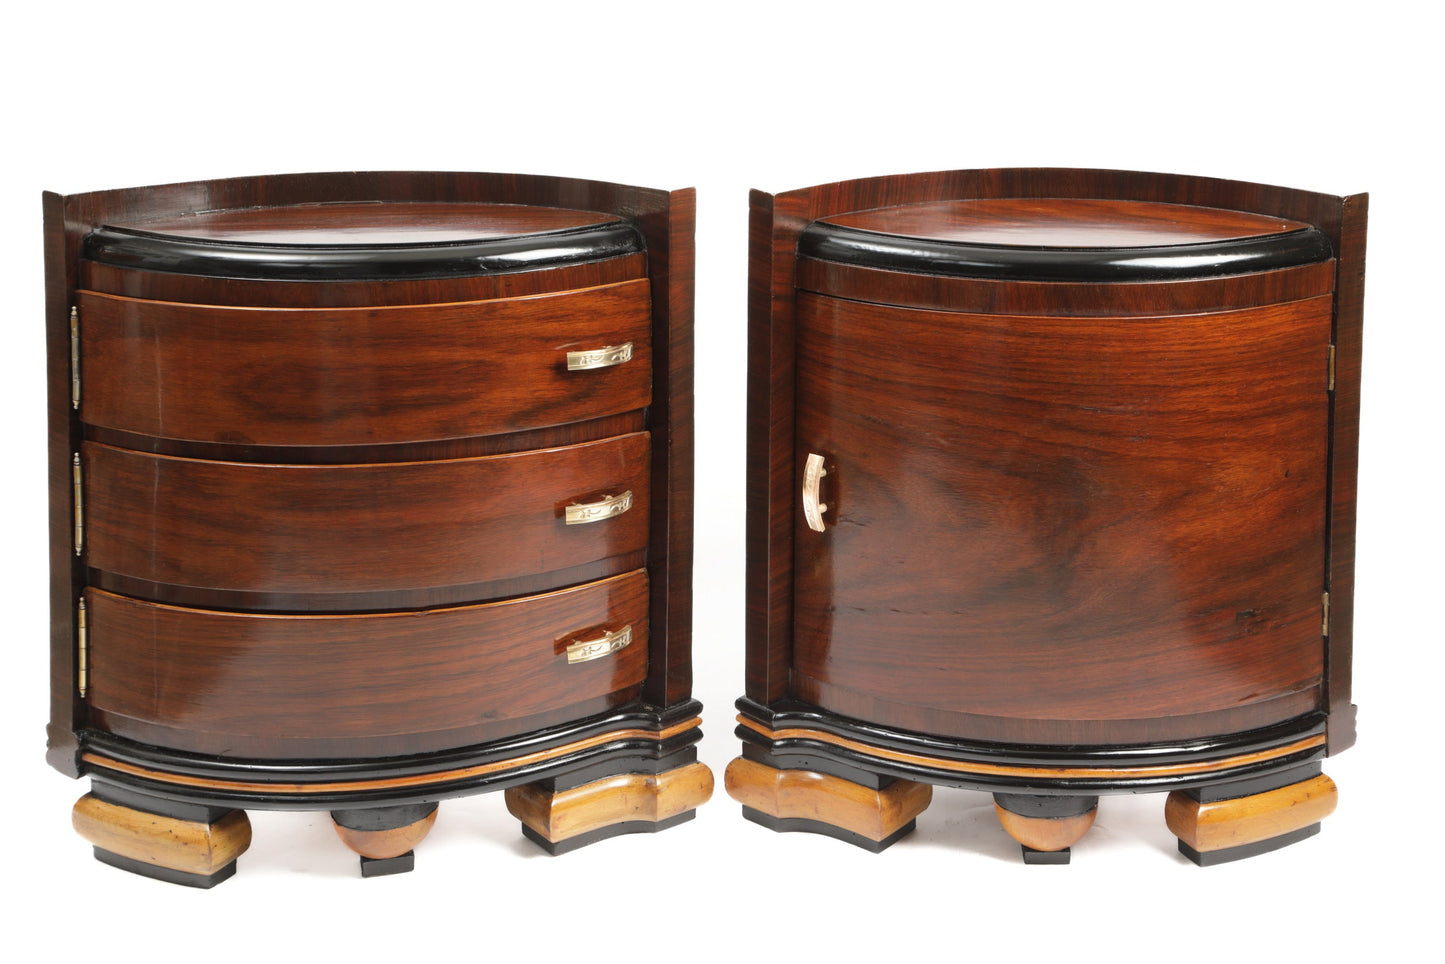 Pair of eye nightstands from the late 1930s